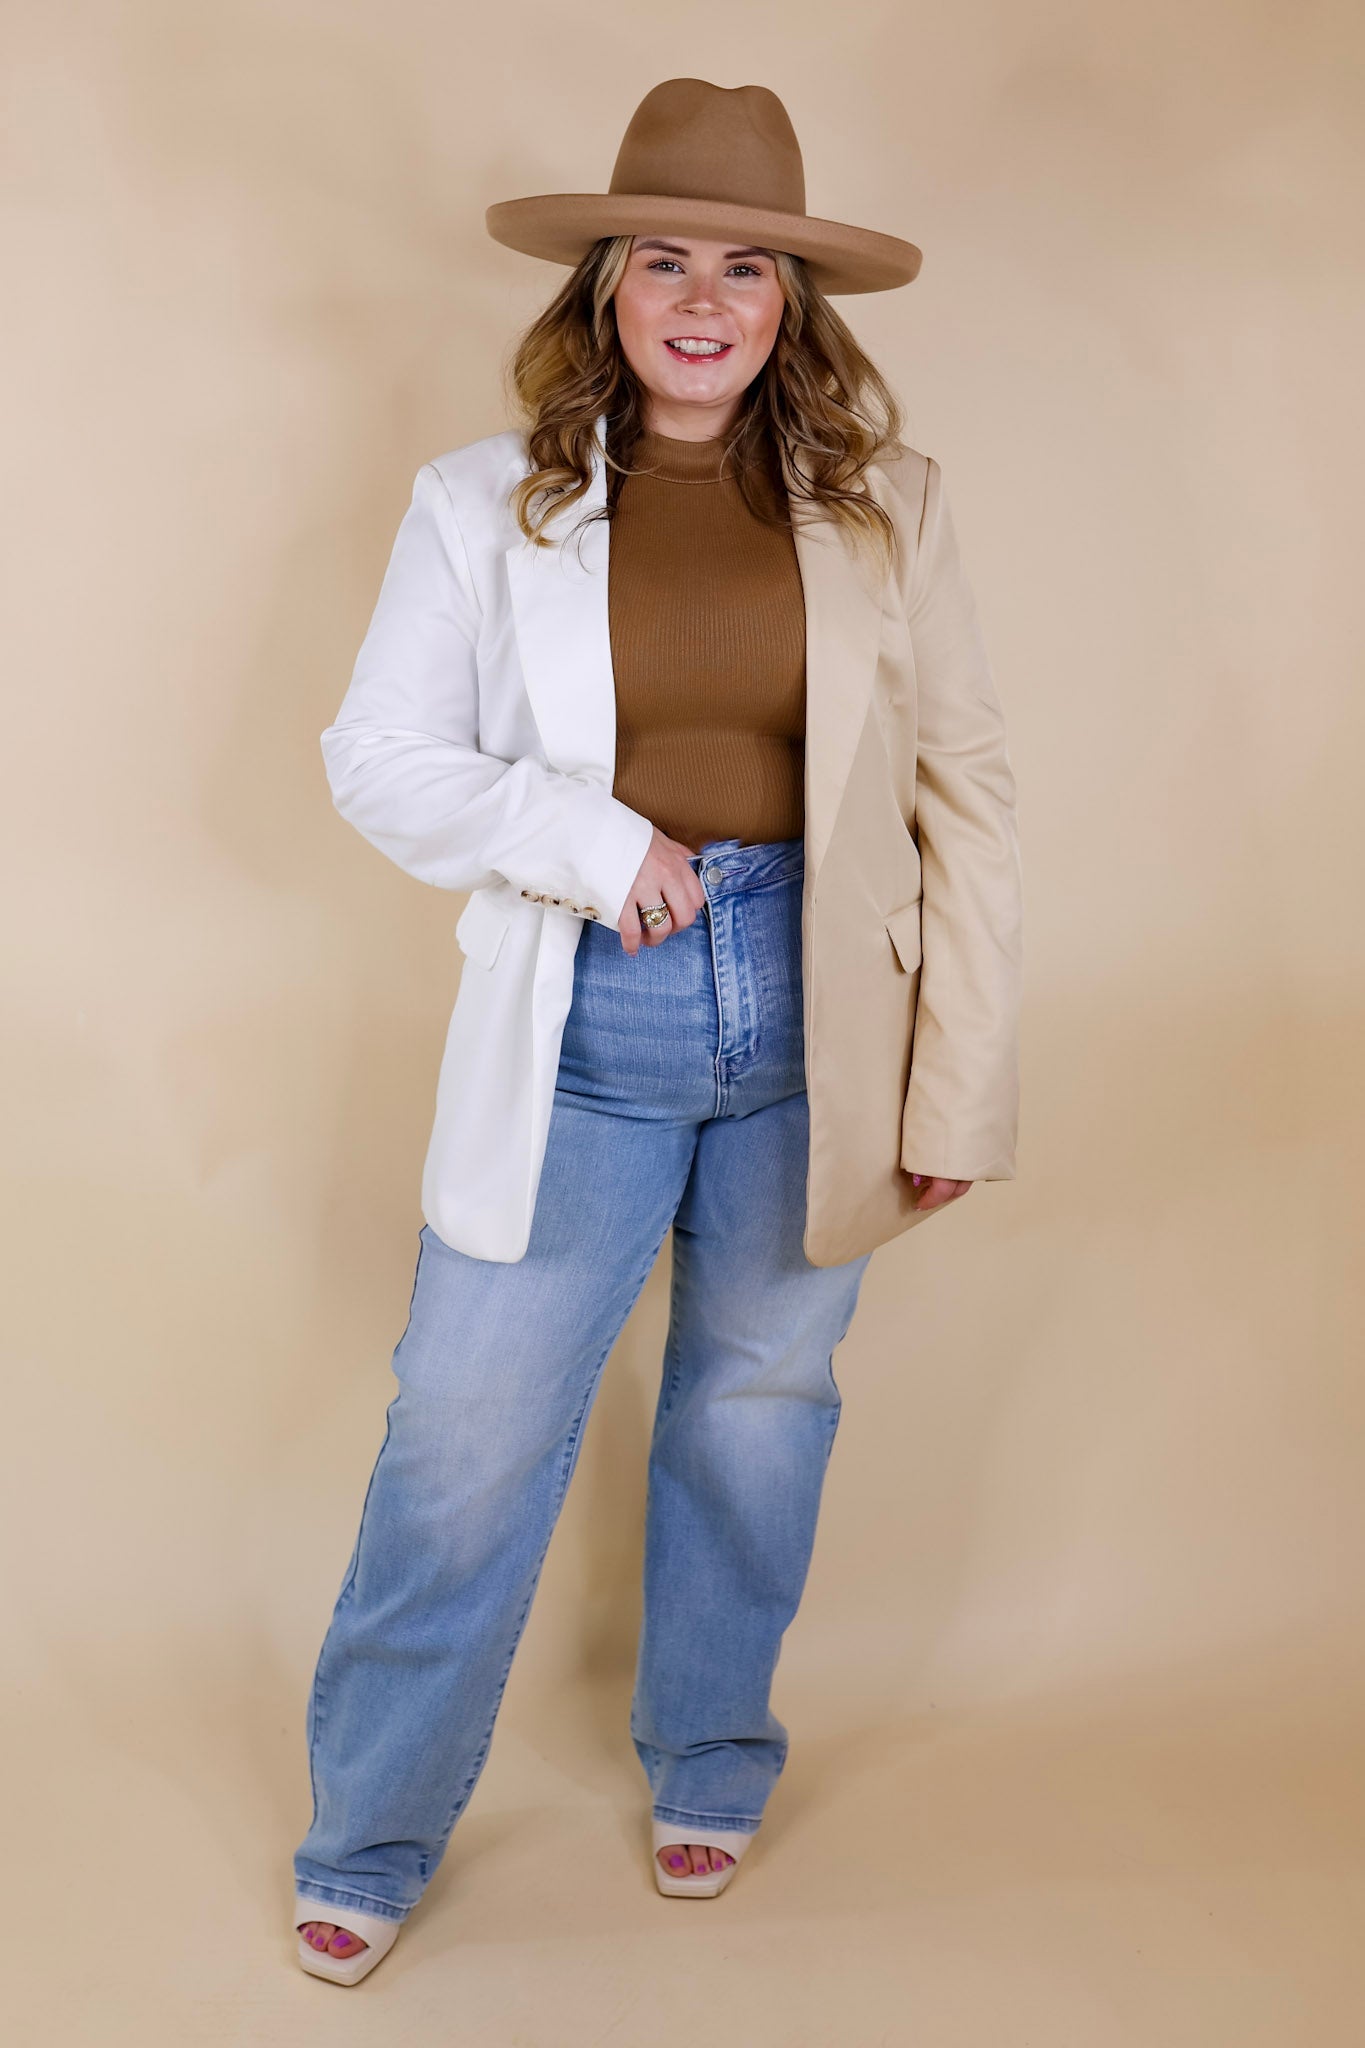 Expect First Class Long Sleeve Color Block Blazer in Beige and White - Giddy Up Glamour Boutique